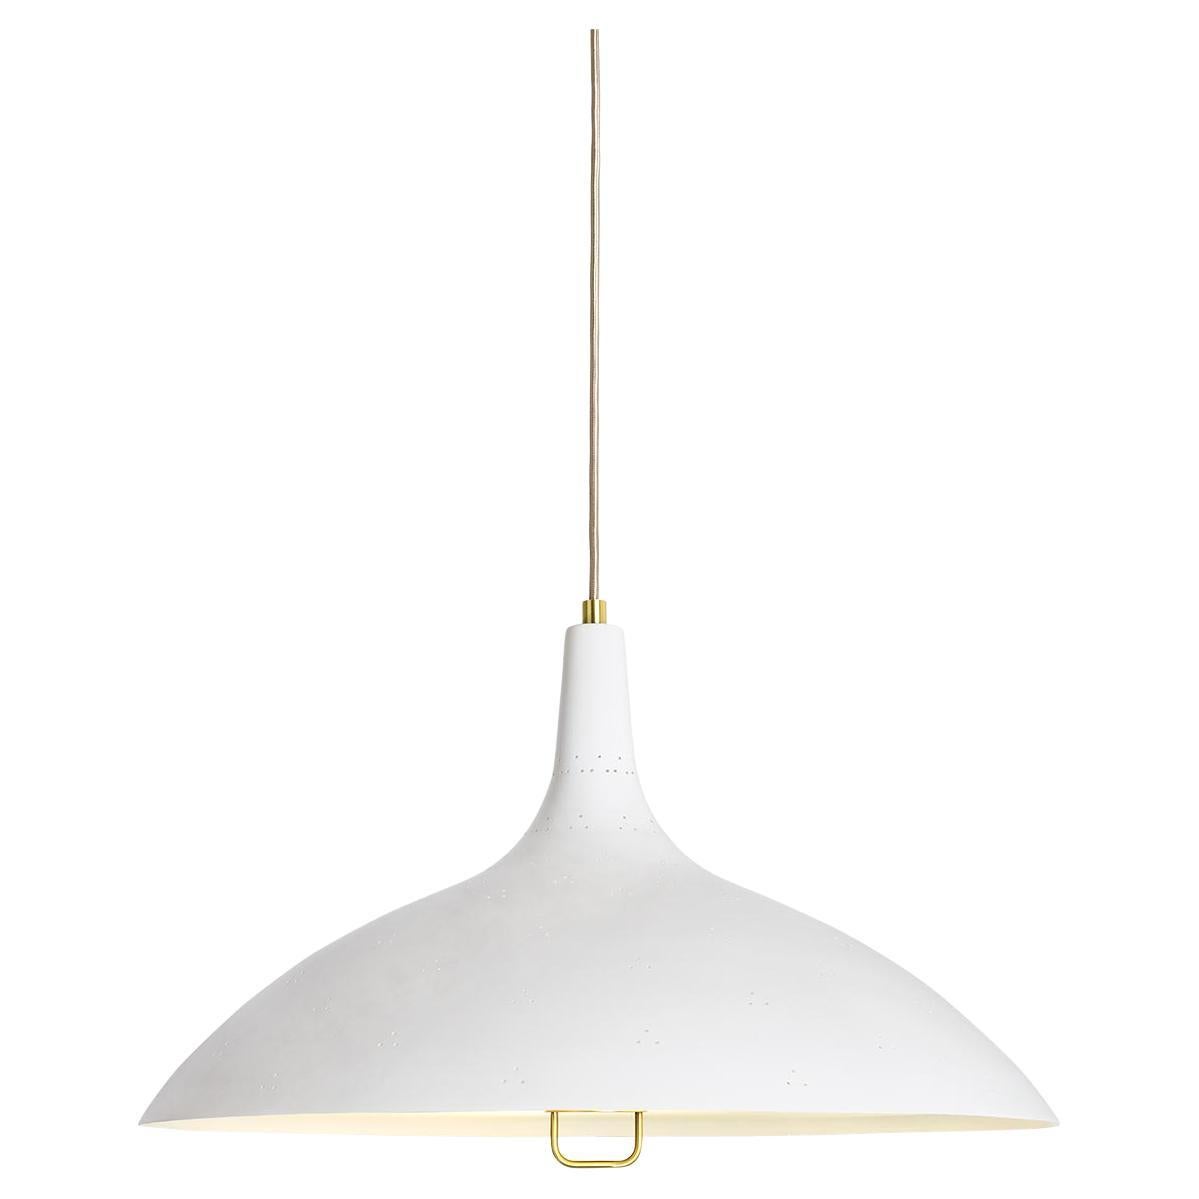 Lampes suspendues Paavo Tynell 1965, blanches en vente